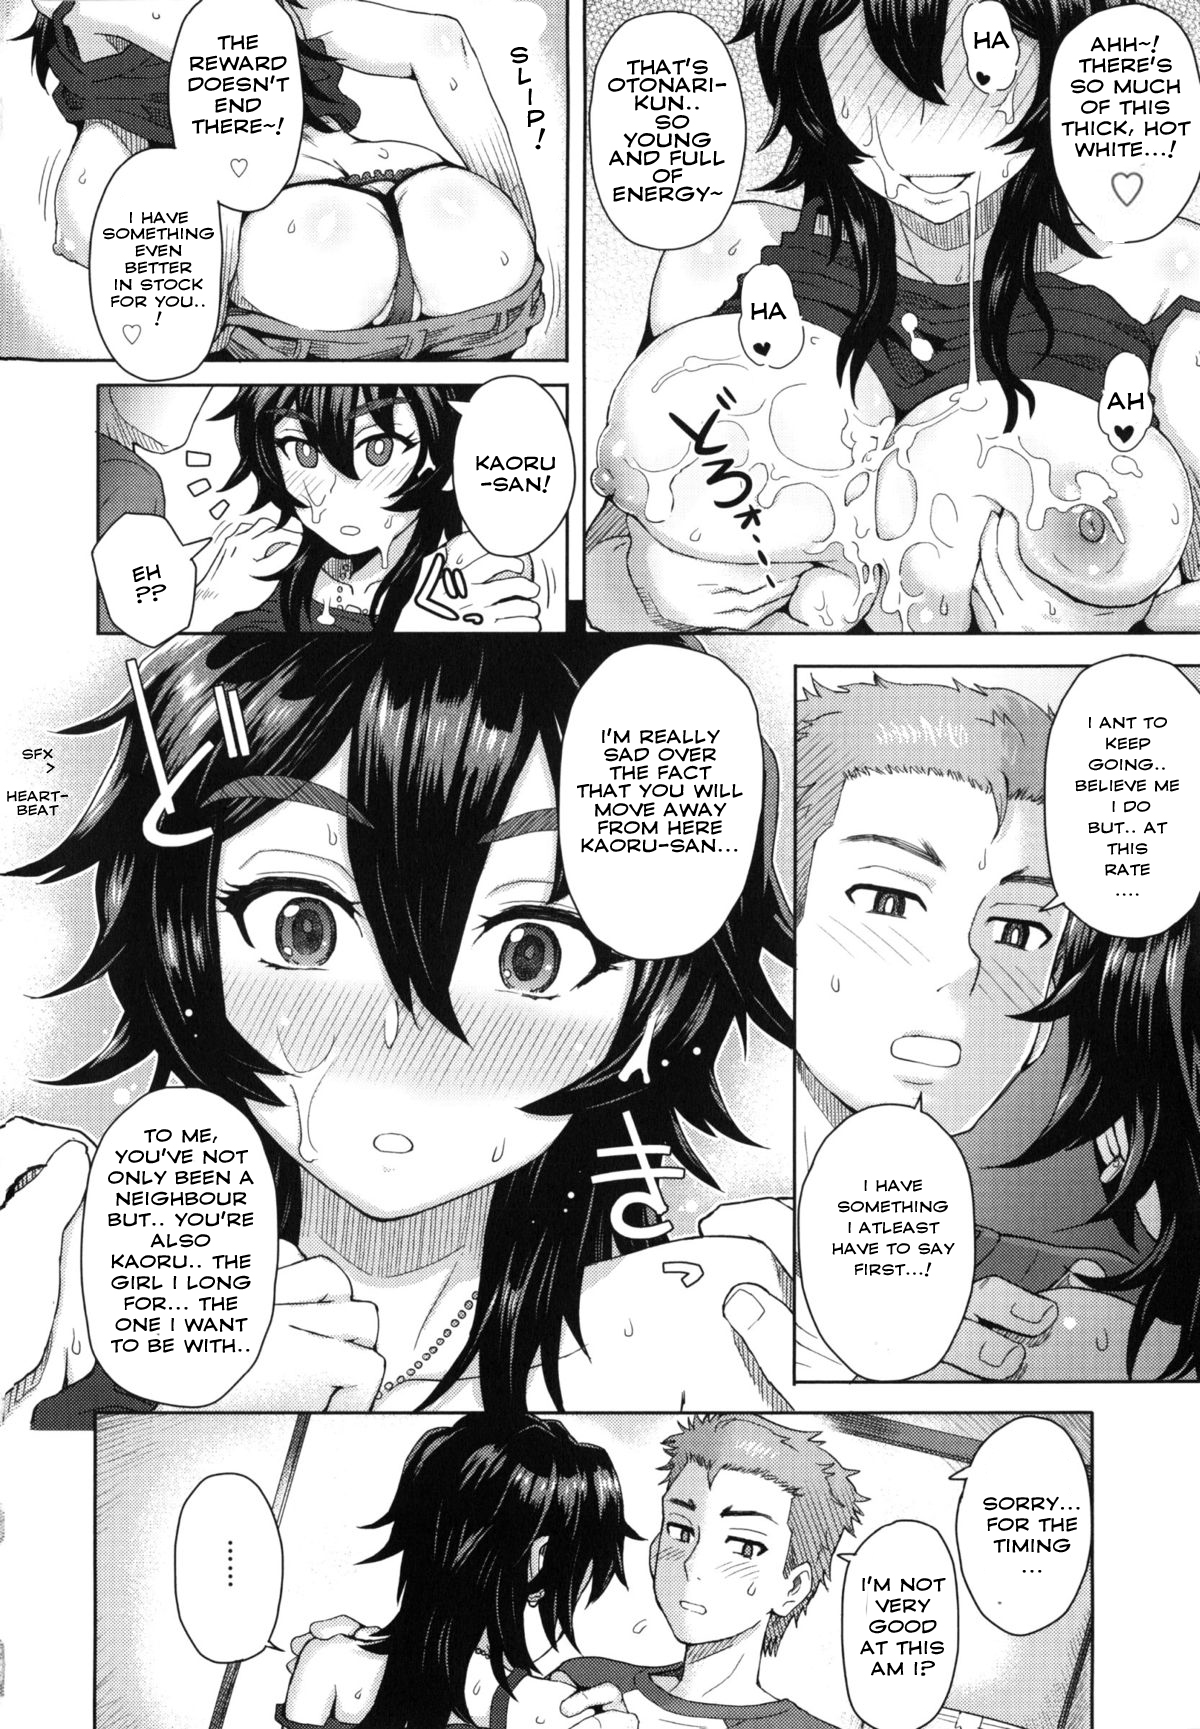 [Itou Eight] The Situation with the Young Girl Next Door Moving in [English] page 8 full